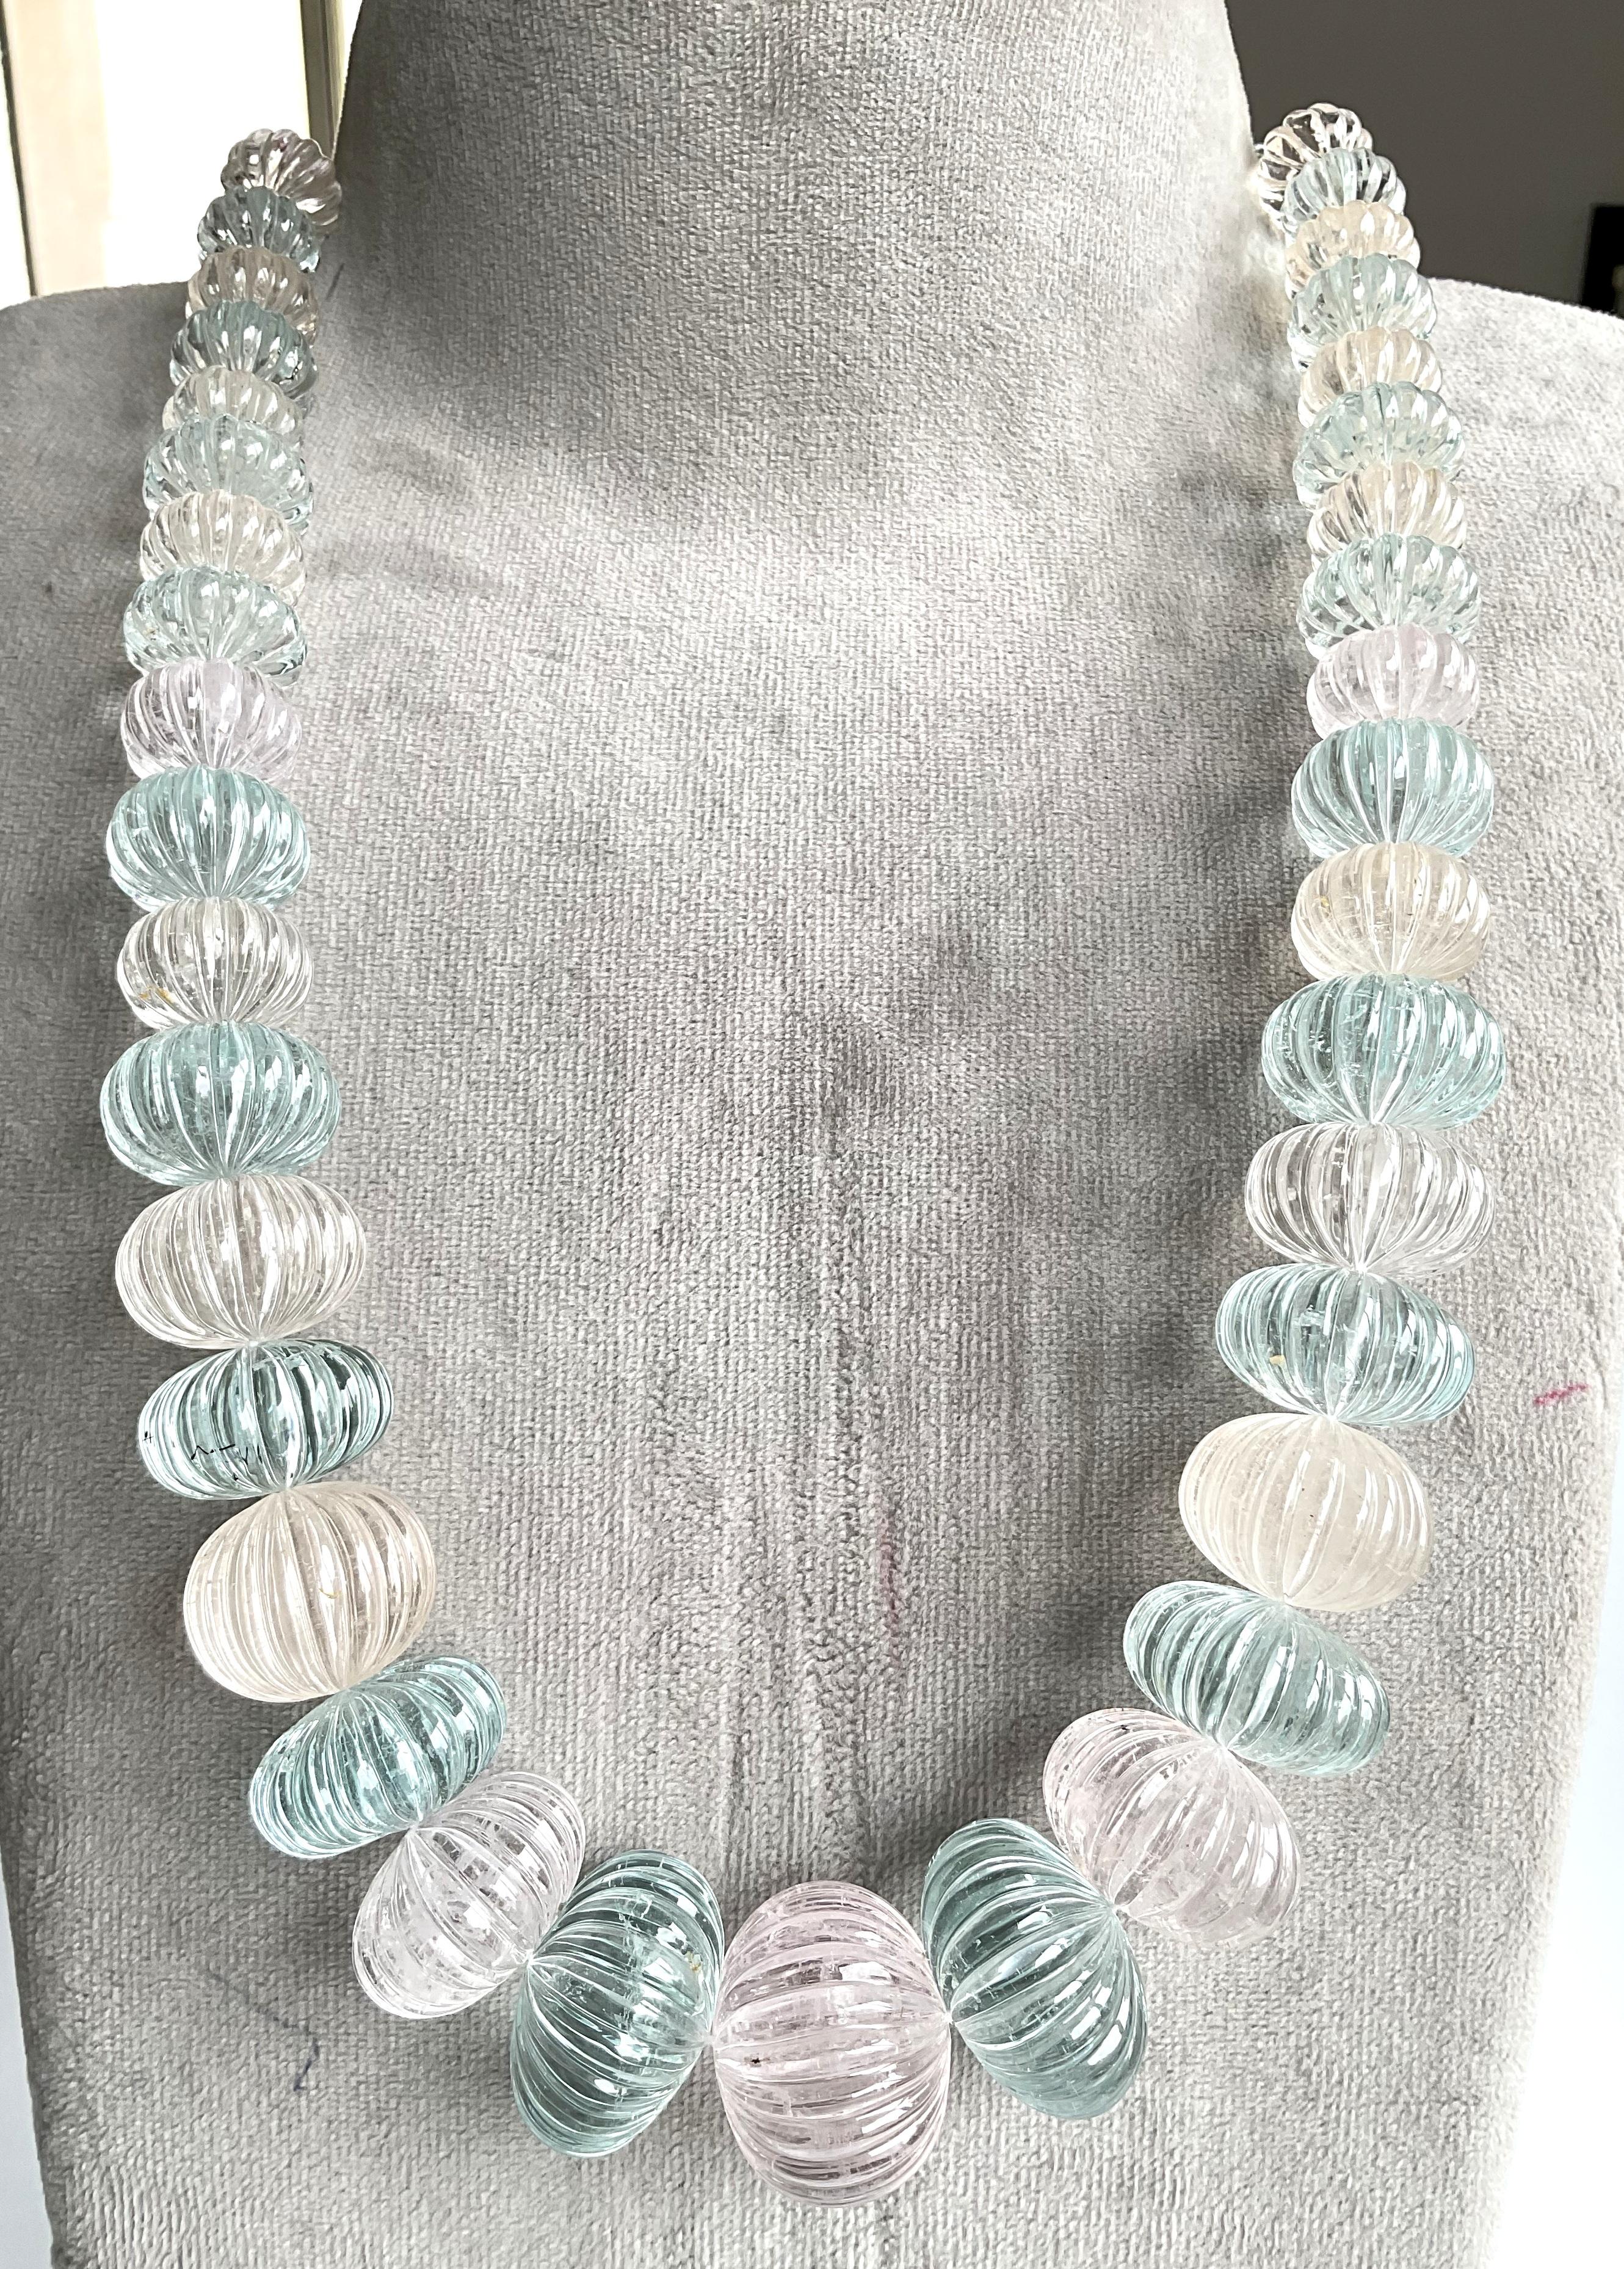 Bead 1768.53 Carats grand Aquamarine & Morganite beryl fluted gems beads Necklace  For Sale